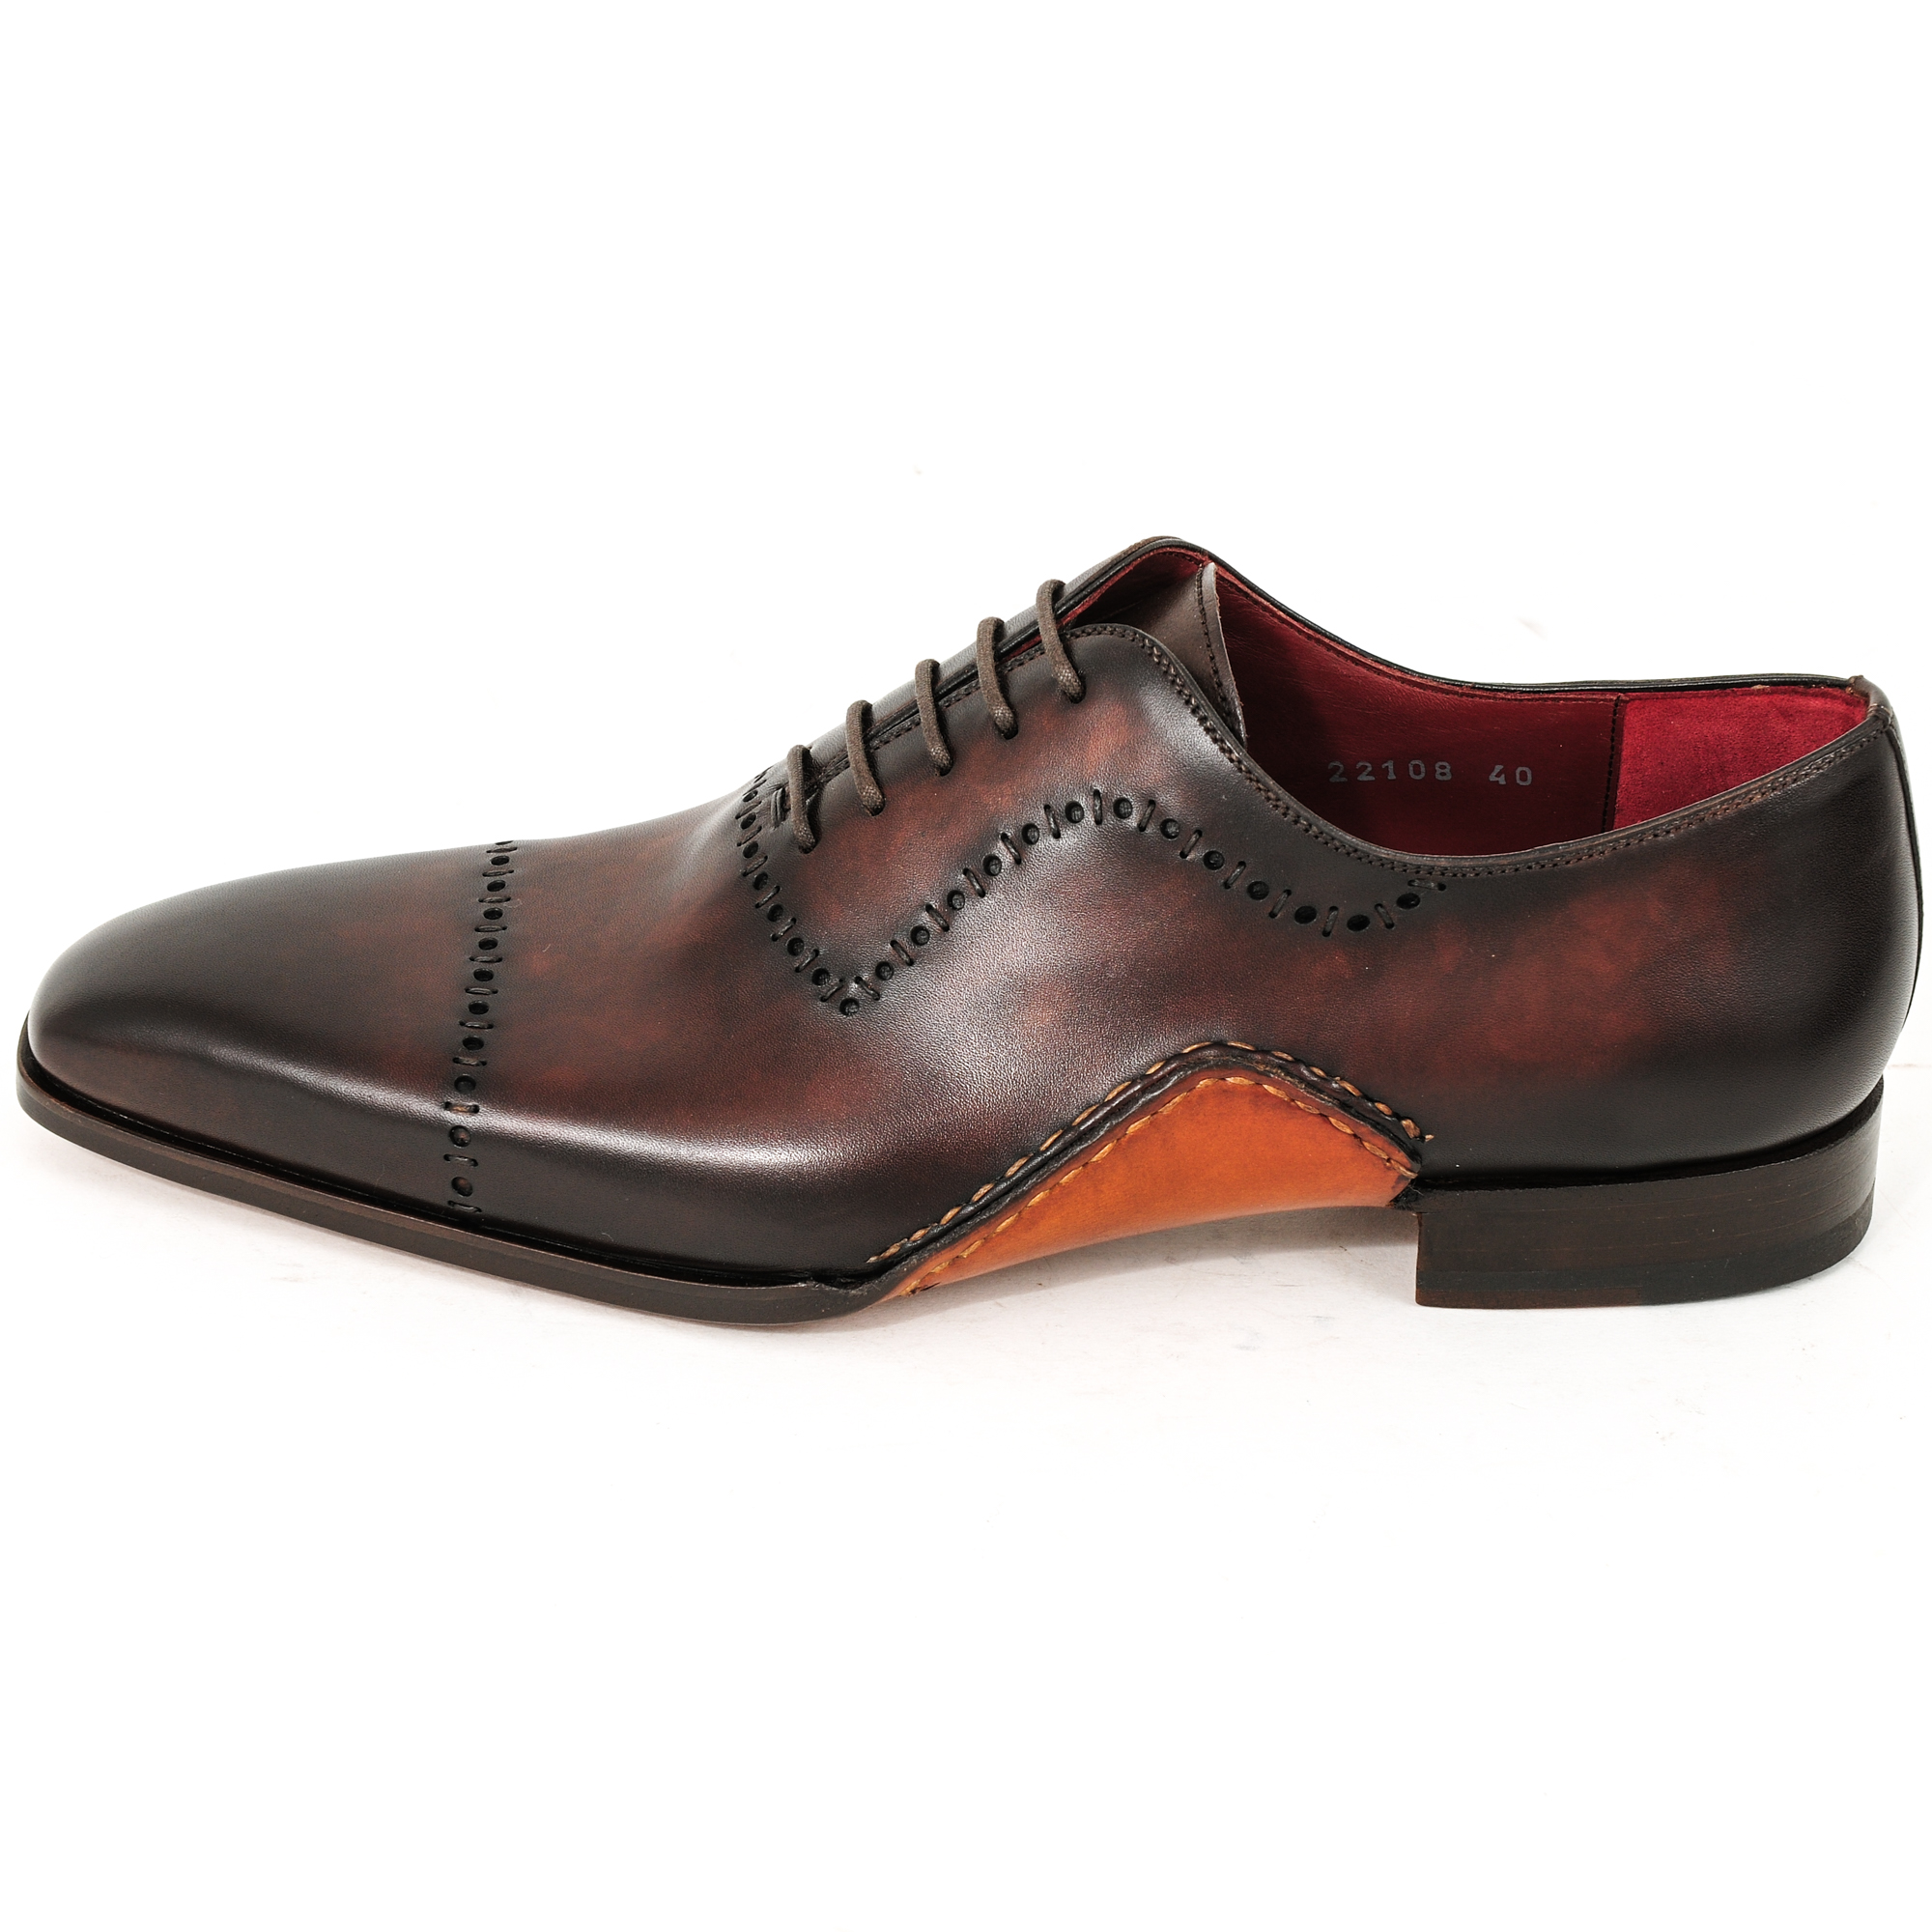 Where to Buy Magnanni Shoes in Barcelona?